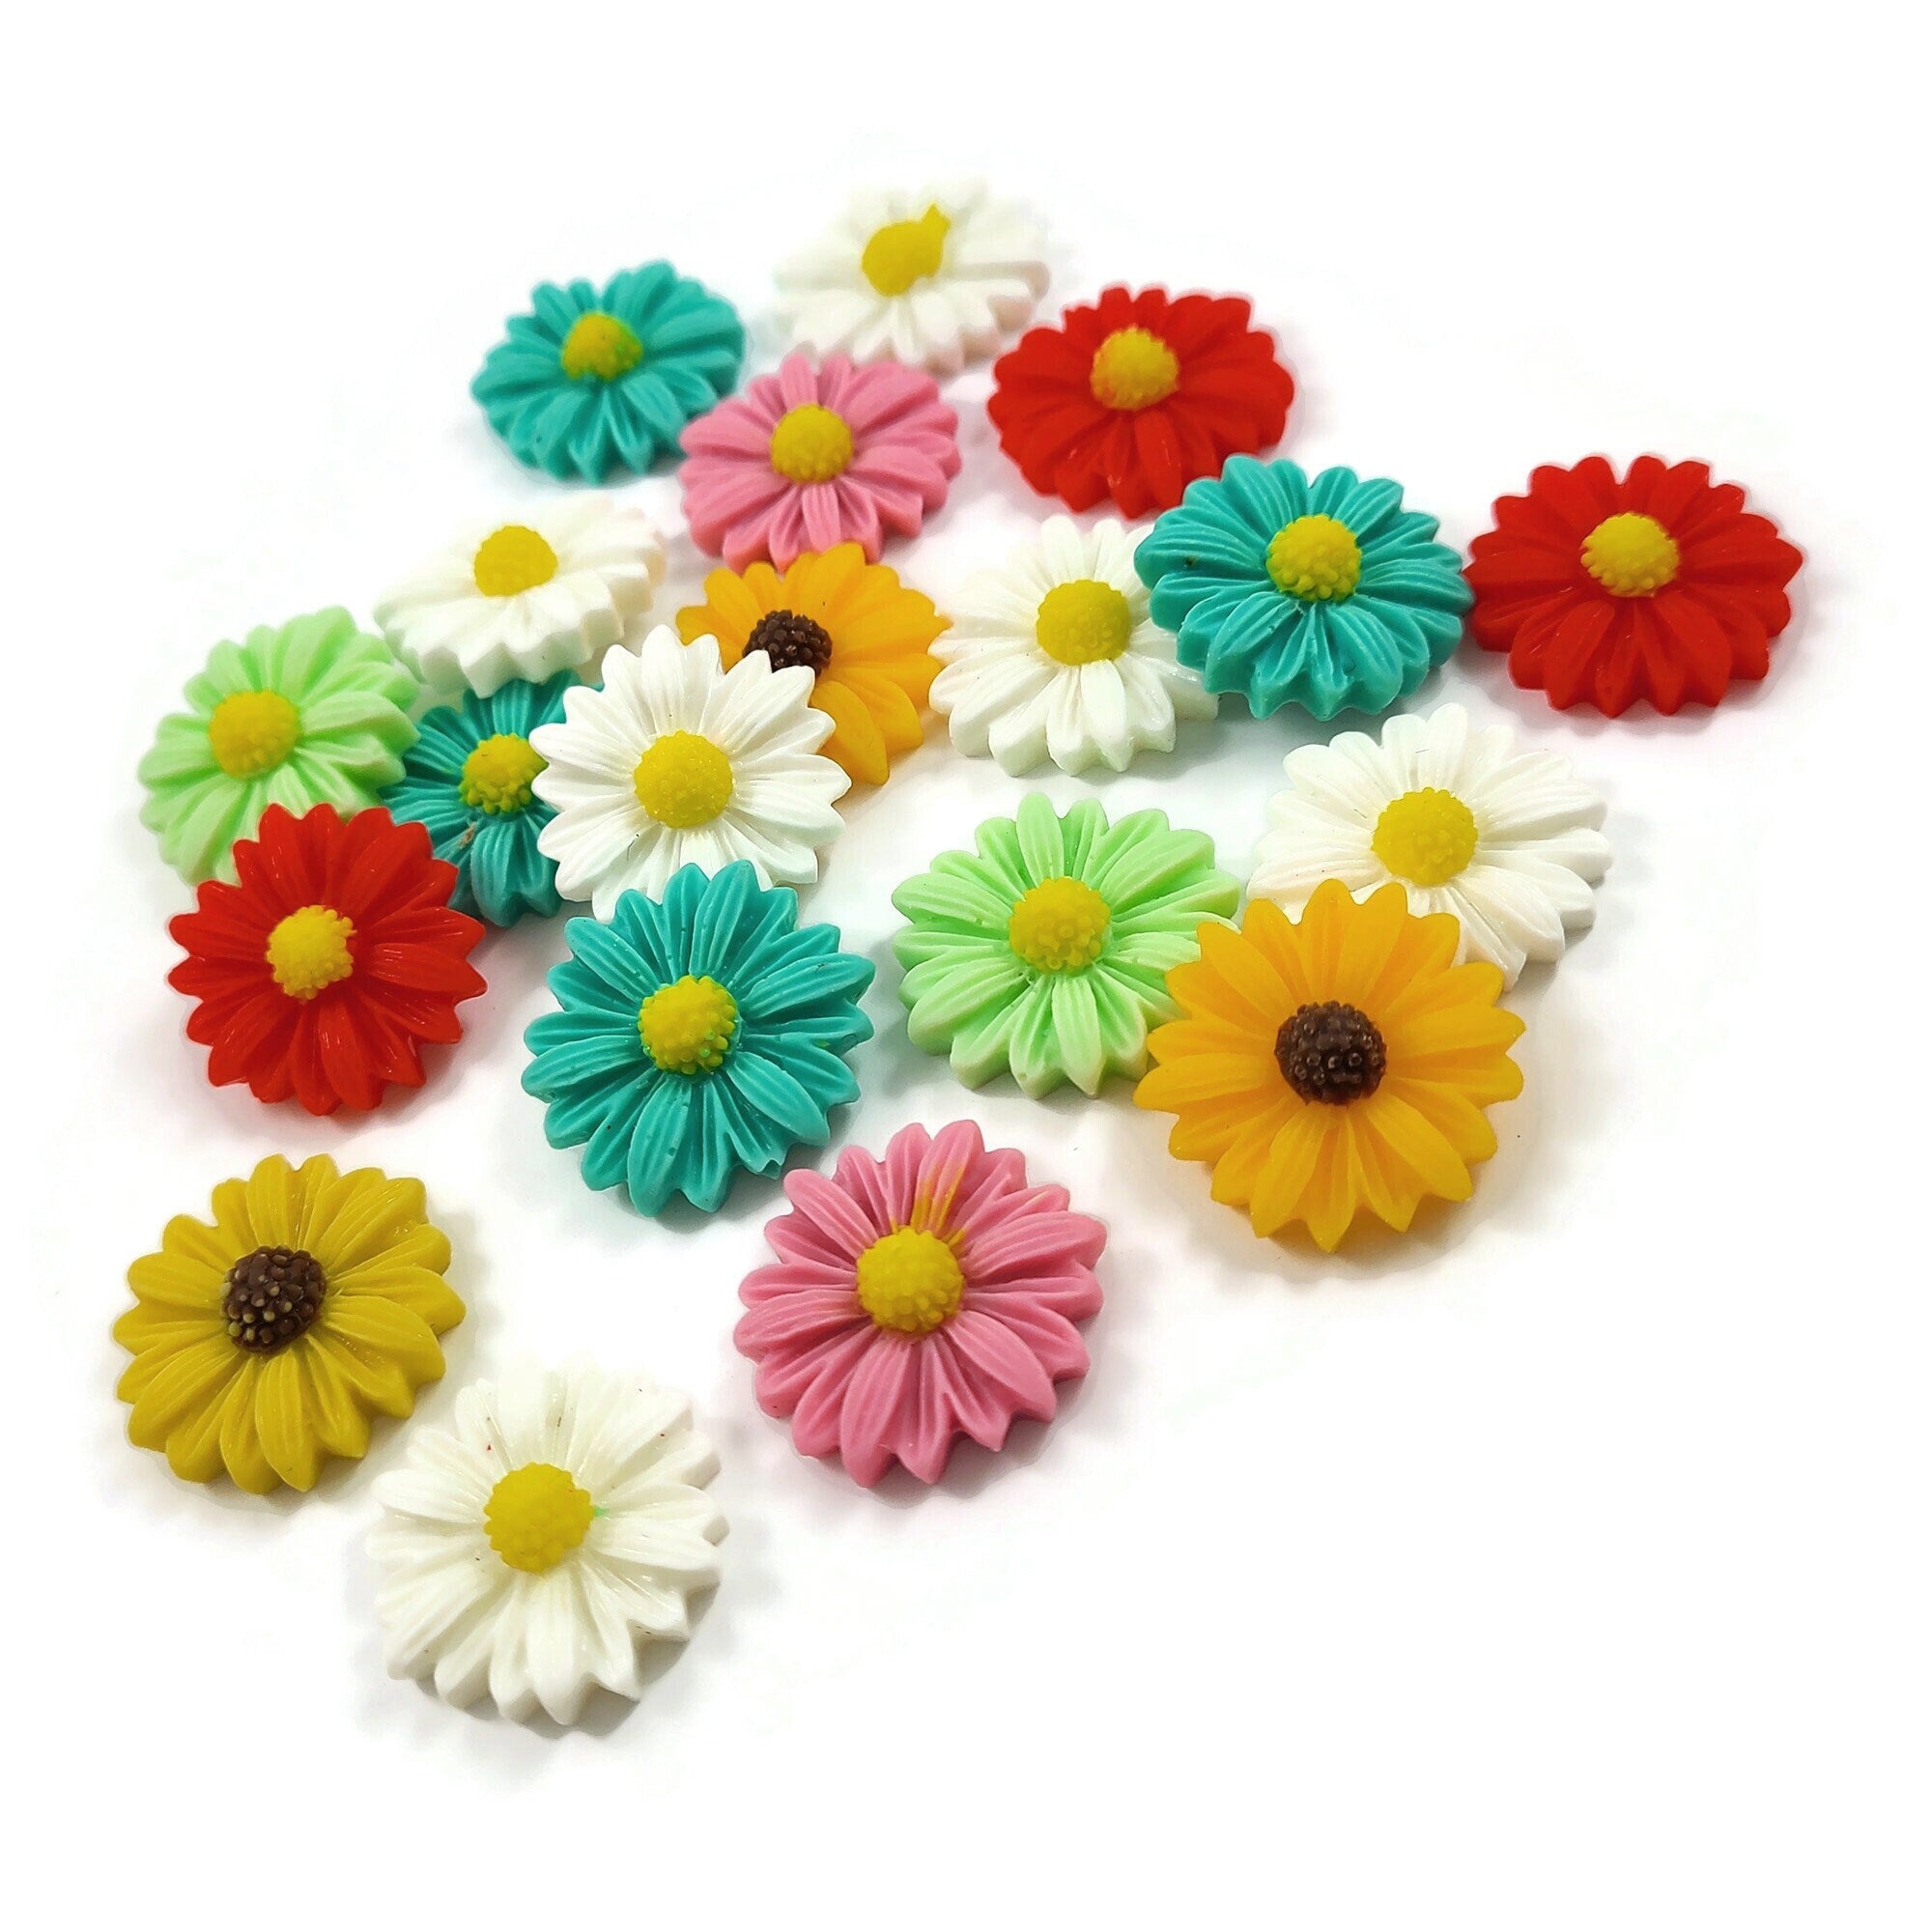 2015 Sale 60pcs Mix Styles Big Kawaii Daisy Sunflower Resin Cabochon Snap Hair  Clips Holiday Color Accessories free Gift box - AliExpress